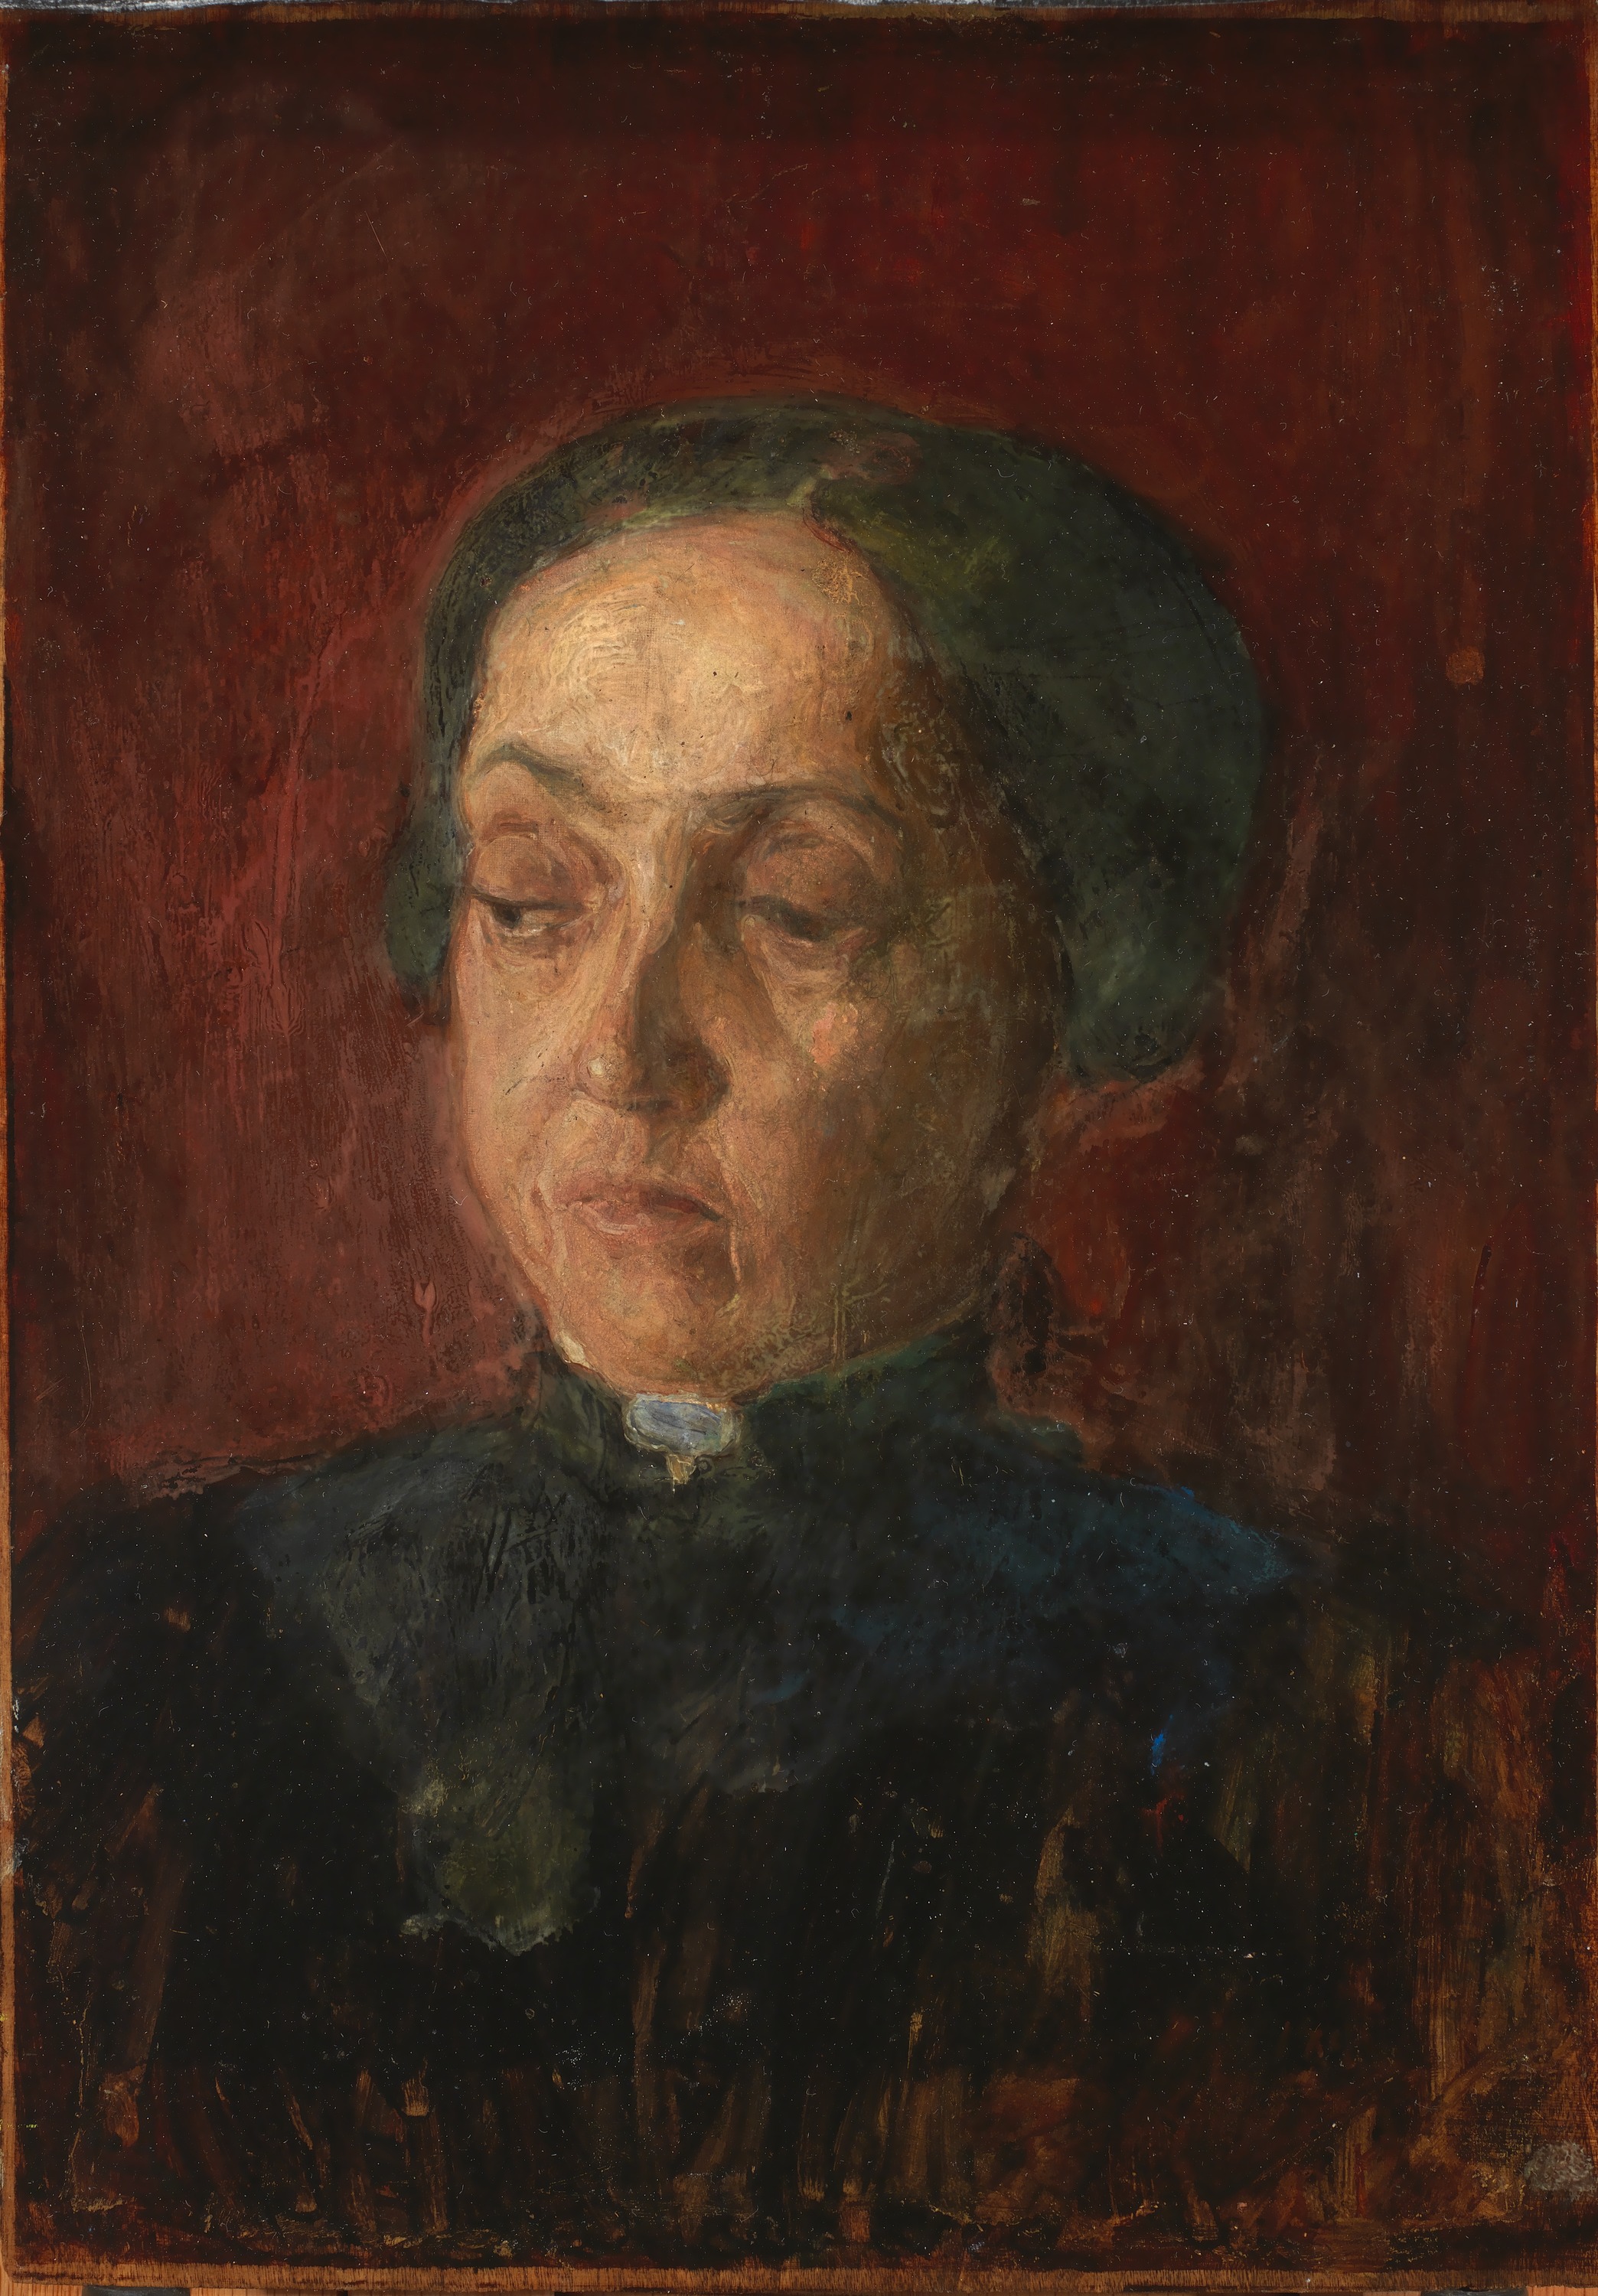 Mother of Henry O. Tanner by Henry Ossawa Tanner - 1st half of 20th century - 33.0 x 23.5 cm. Smithsonian American Art Museum